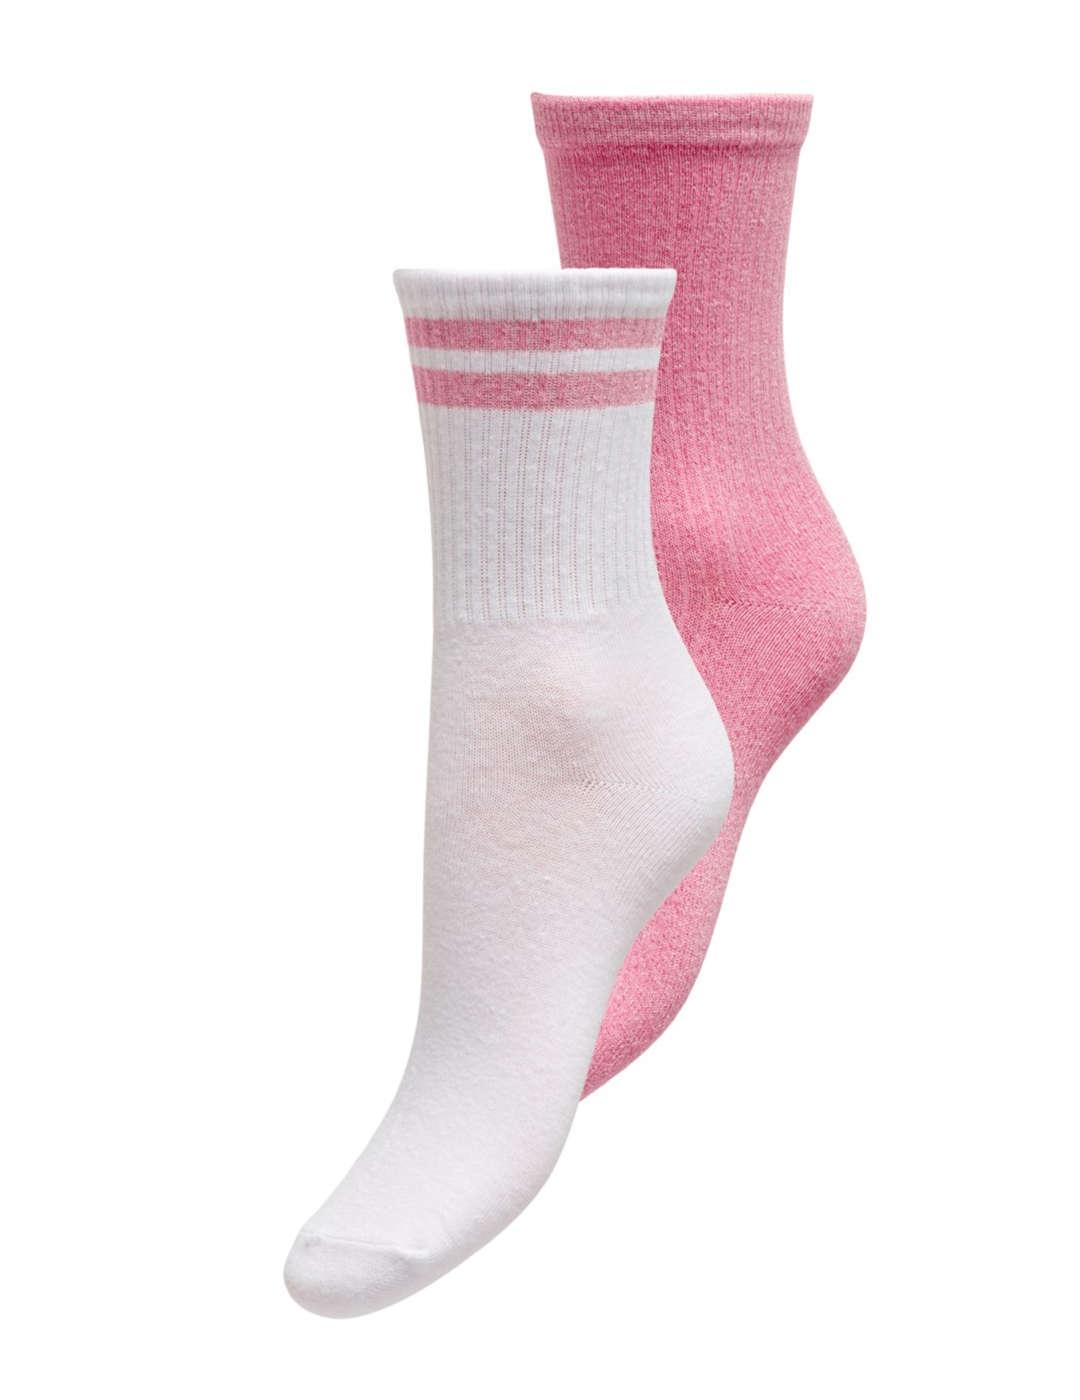 Calcetines altos Only Tanja pack2 rosa y blanco para mujer